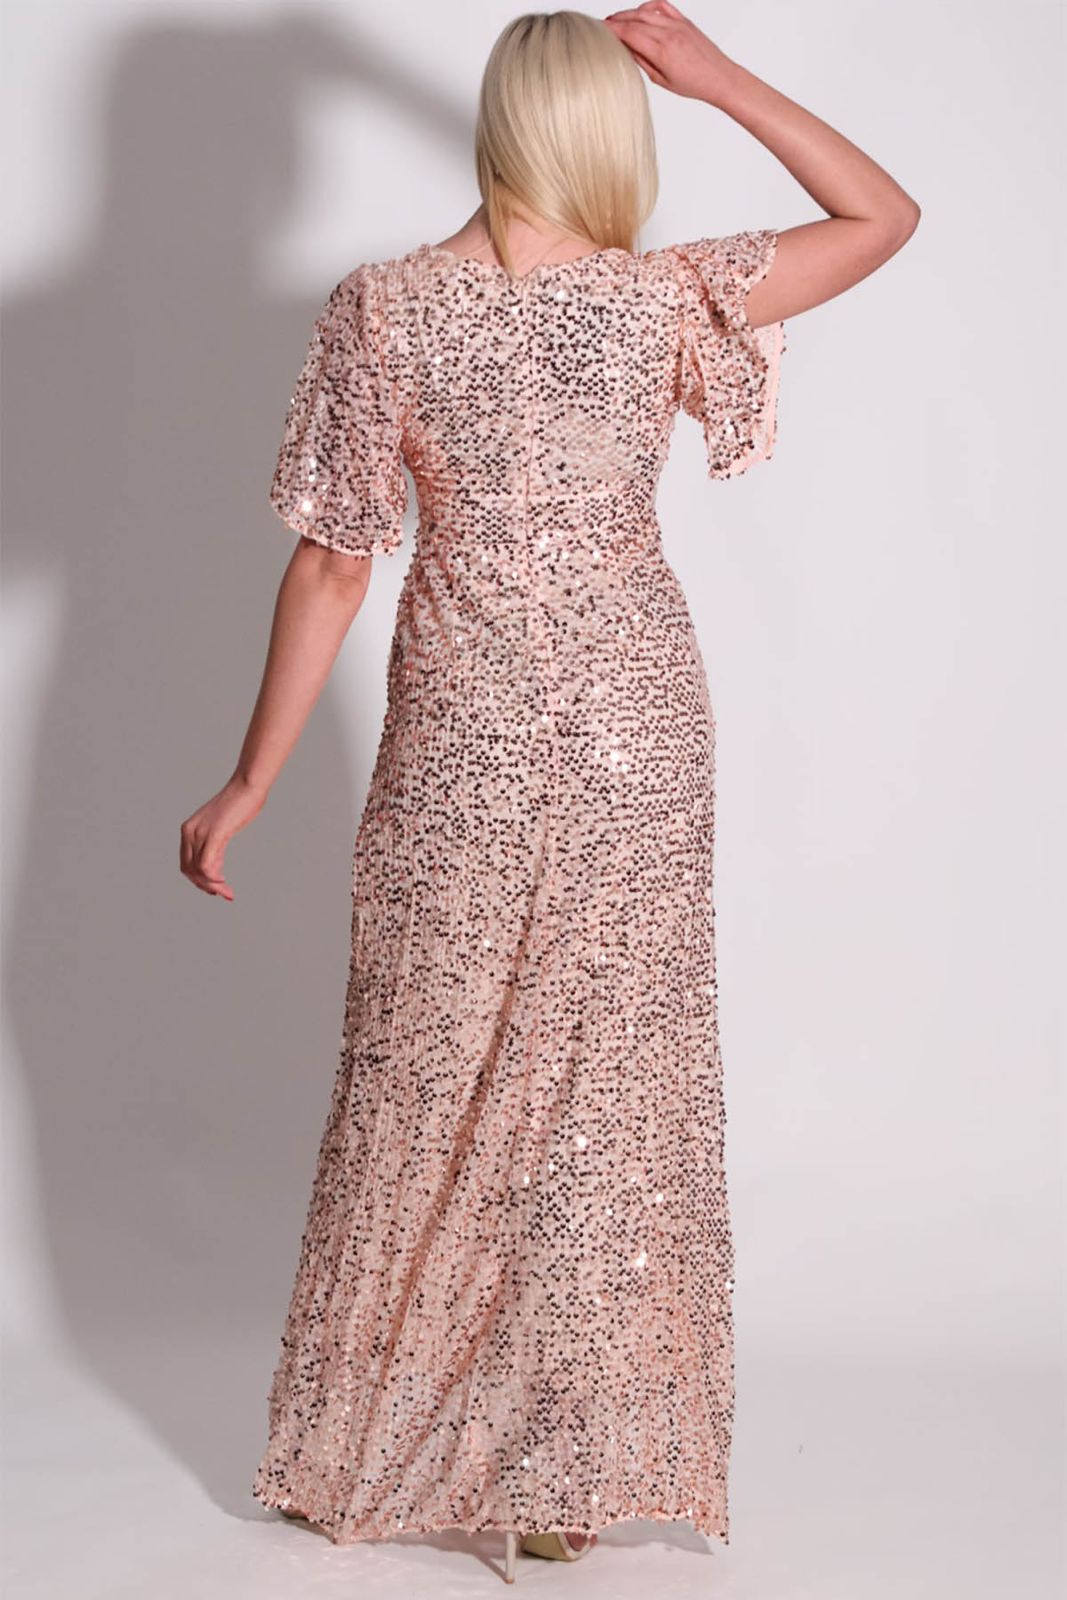 Sequin Maxi Dress In Rose Gold (Single Piece)